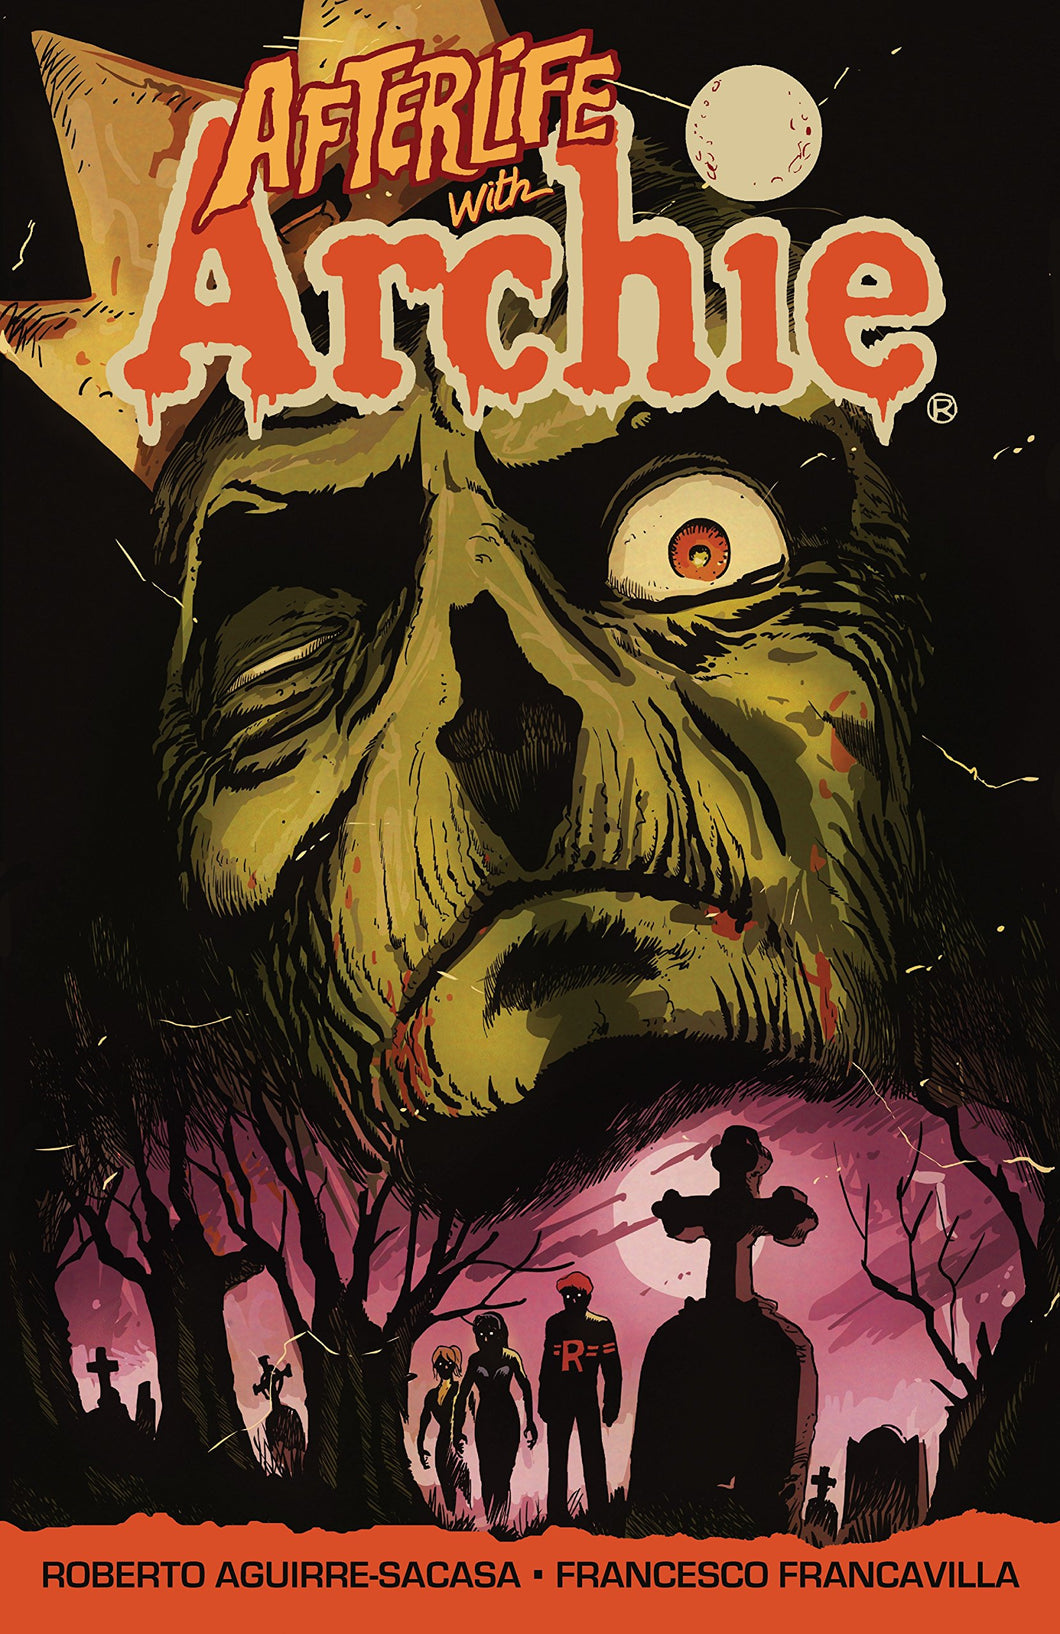 Afterlife with Archie Escape Riverdale